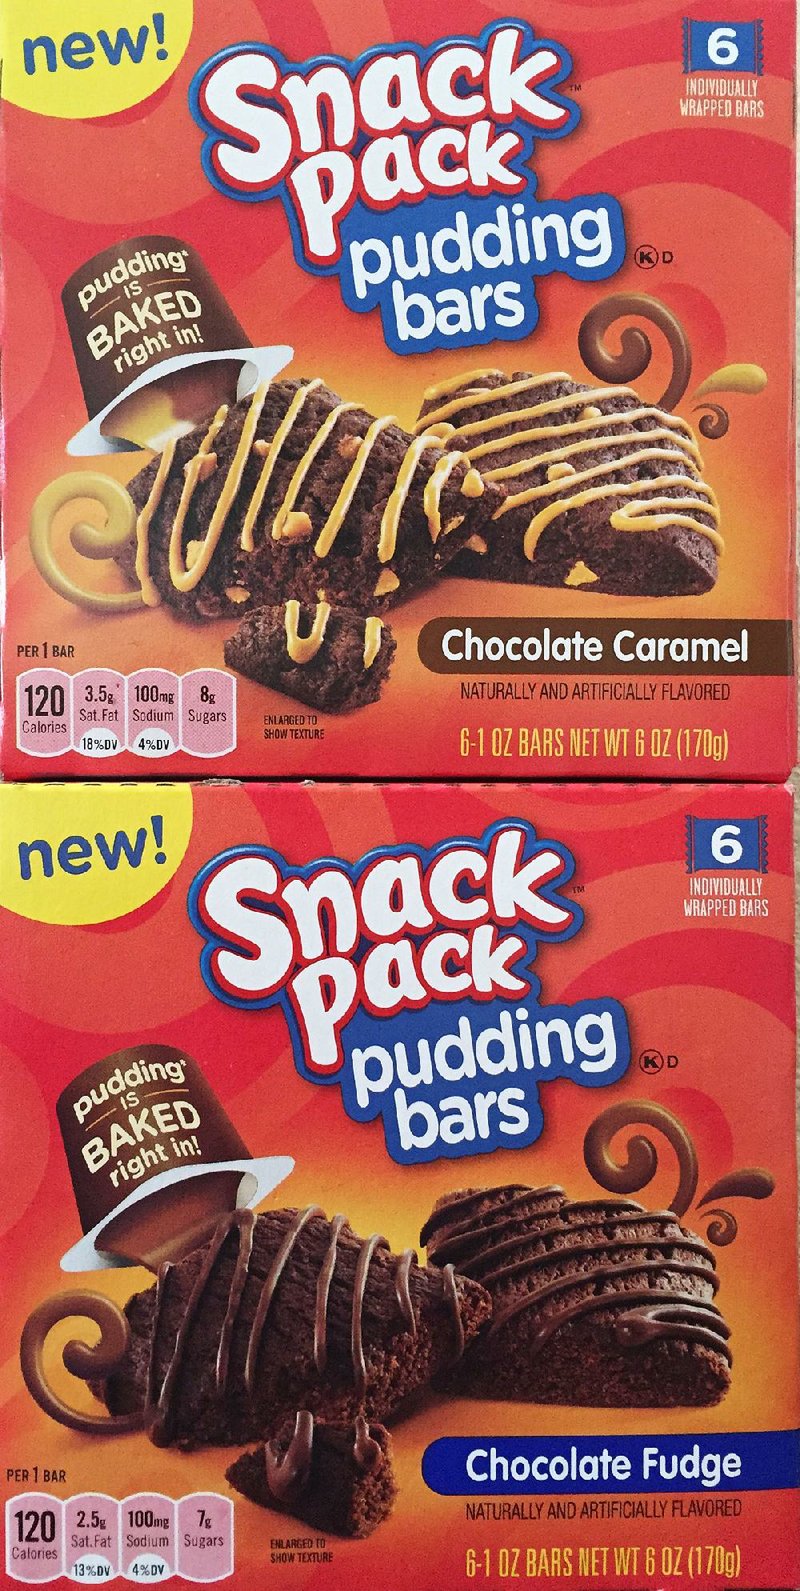 Snack Pack Pudding Bars flavors include chocolate caramel and chocolate fudge.